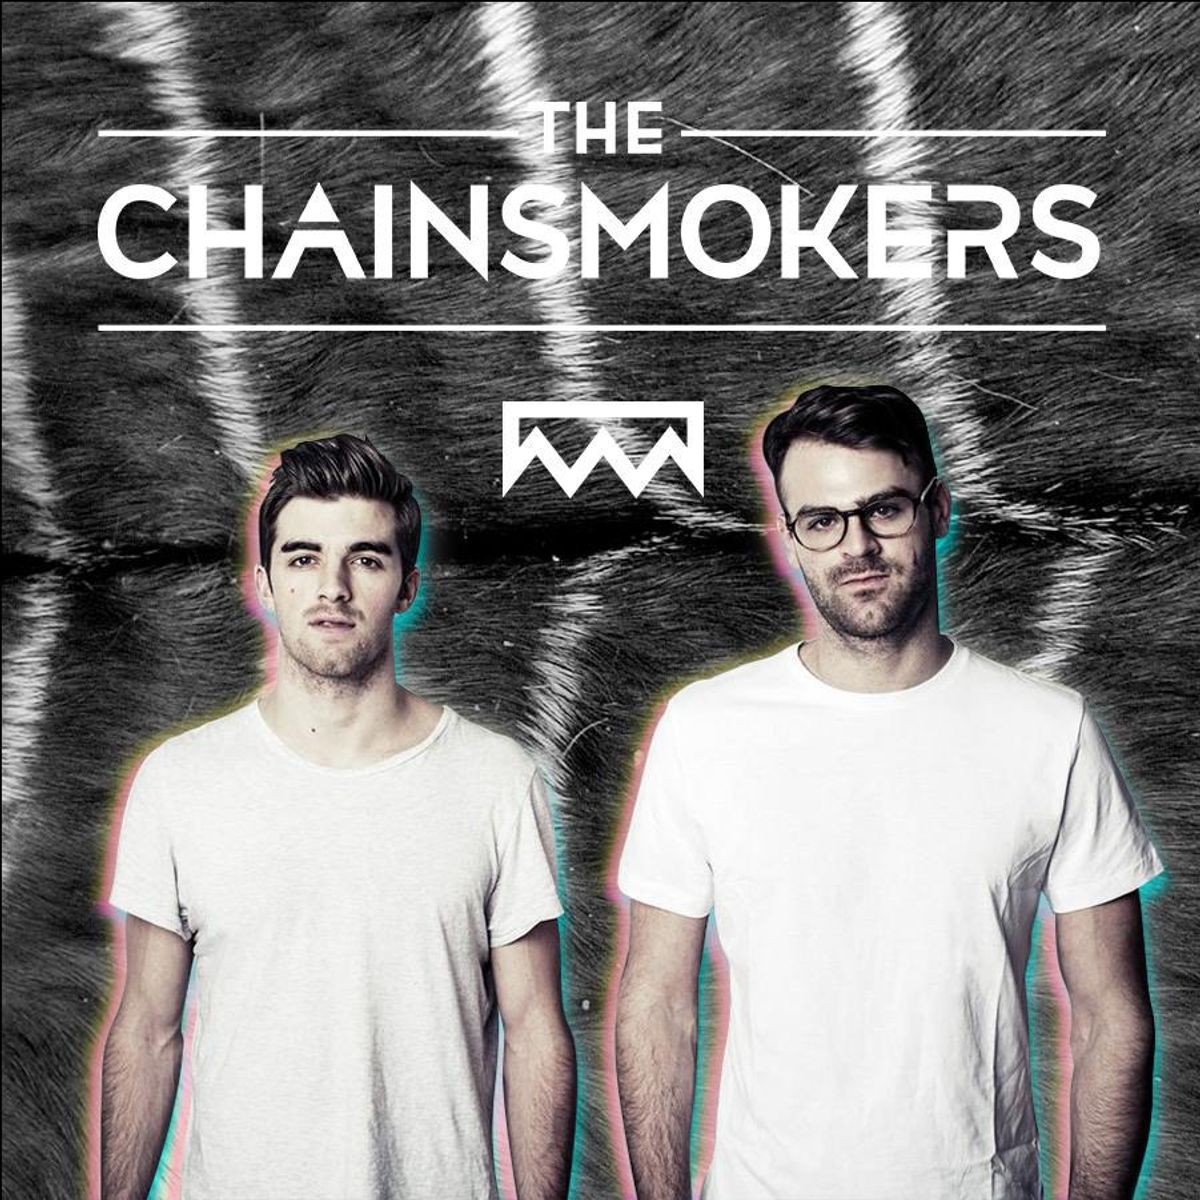 A Definitive Ranking of the Chainsmokers' Singles